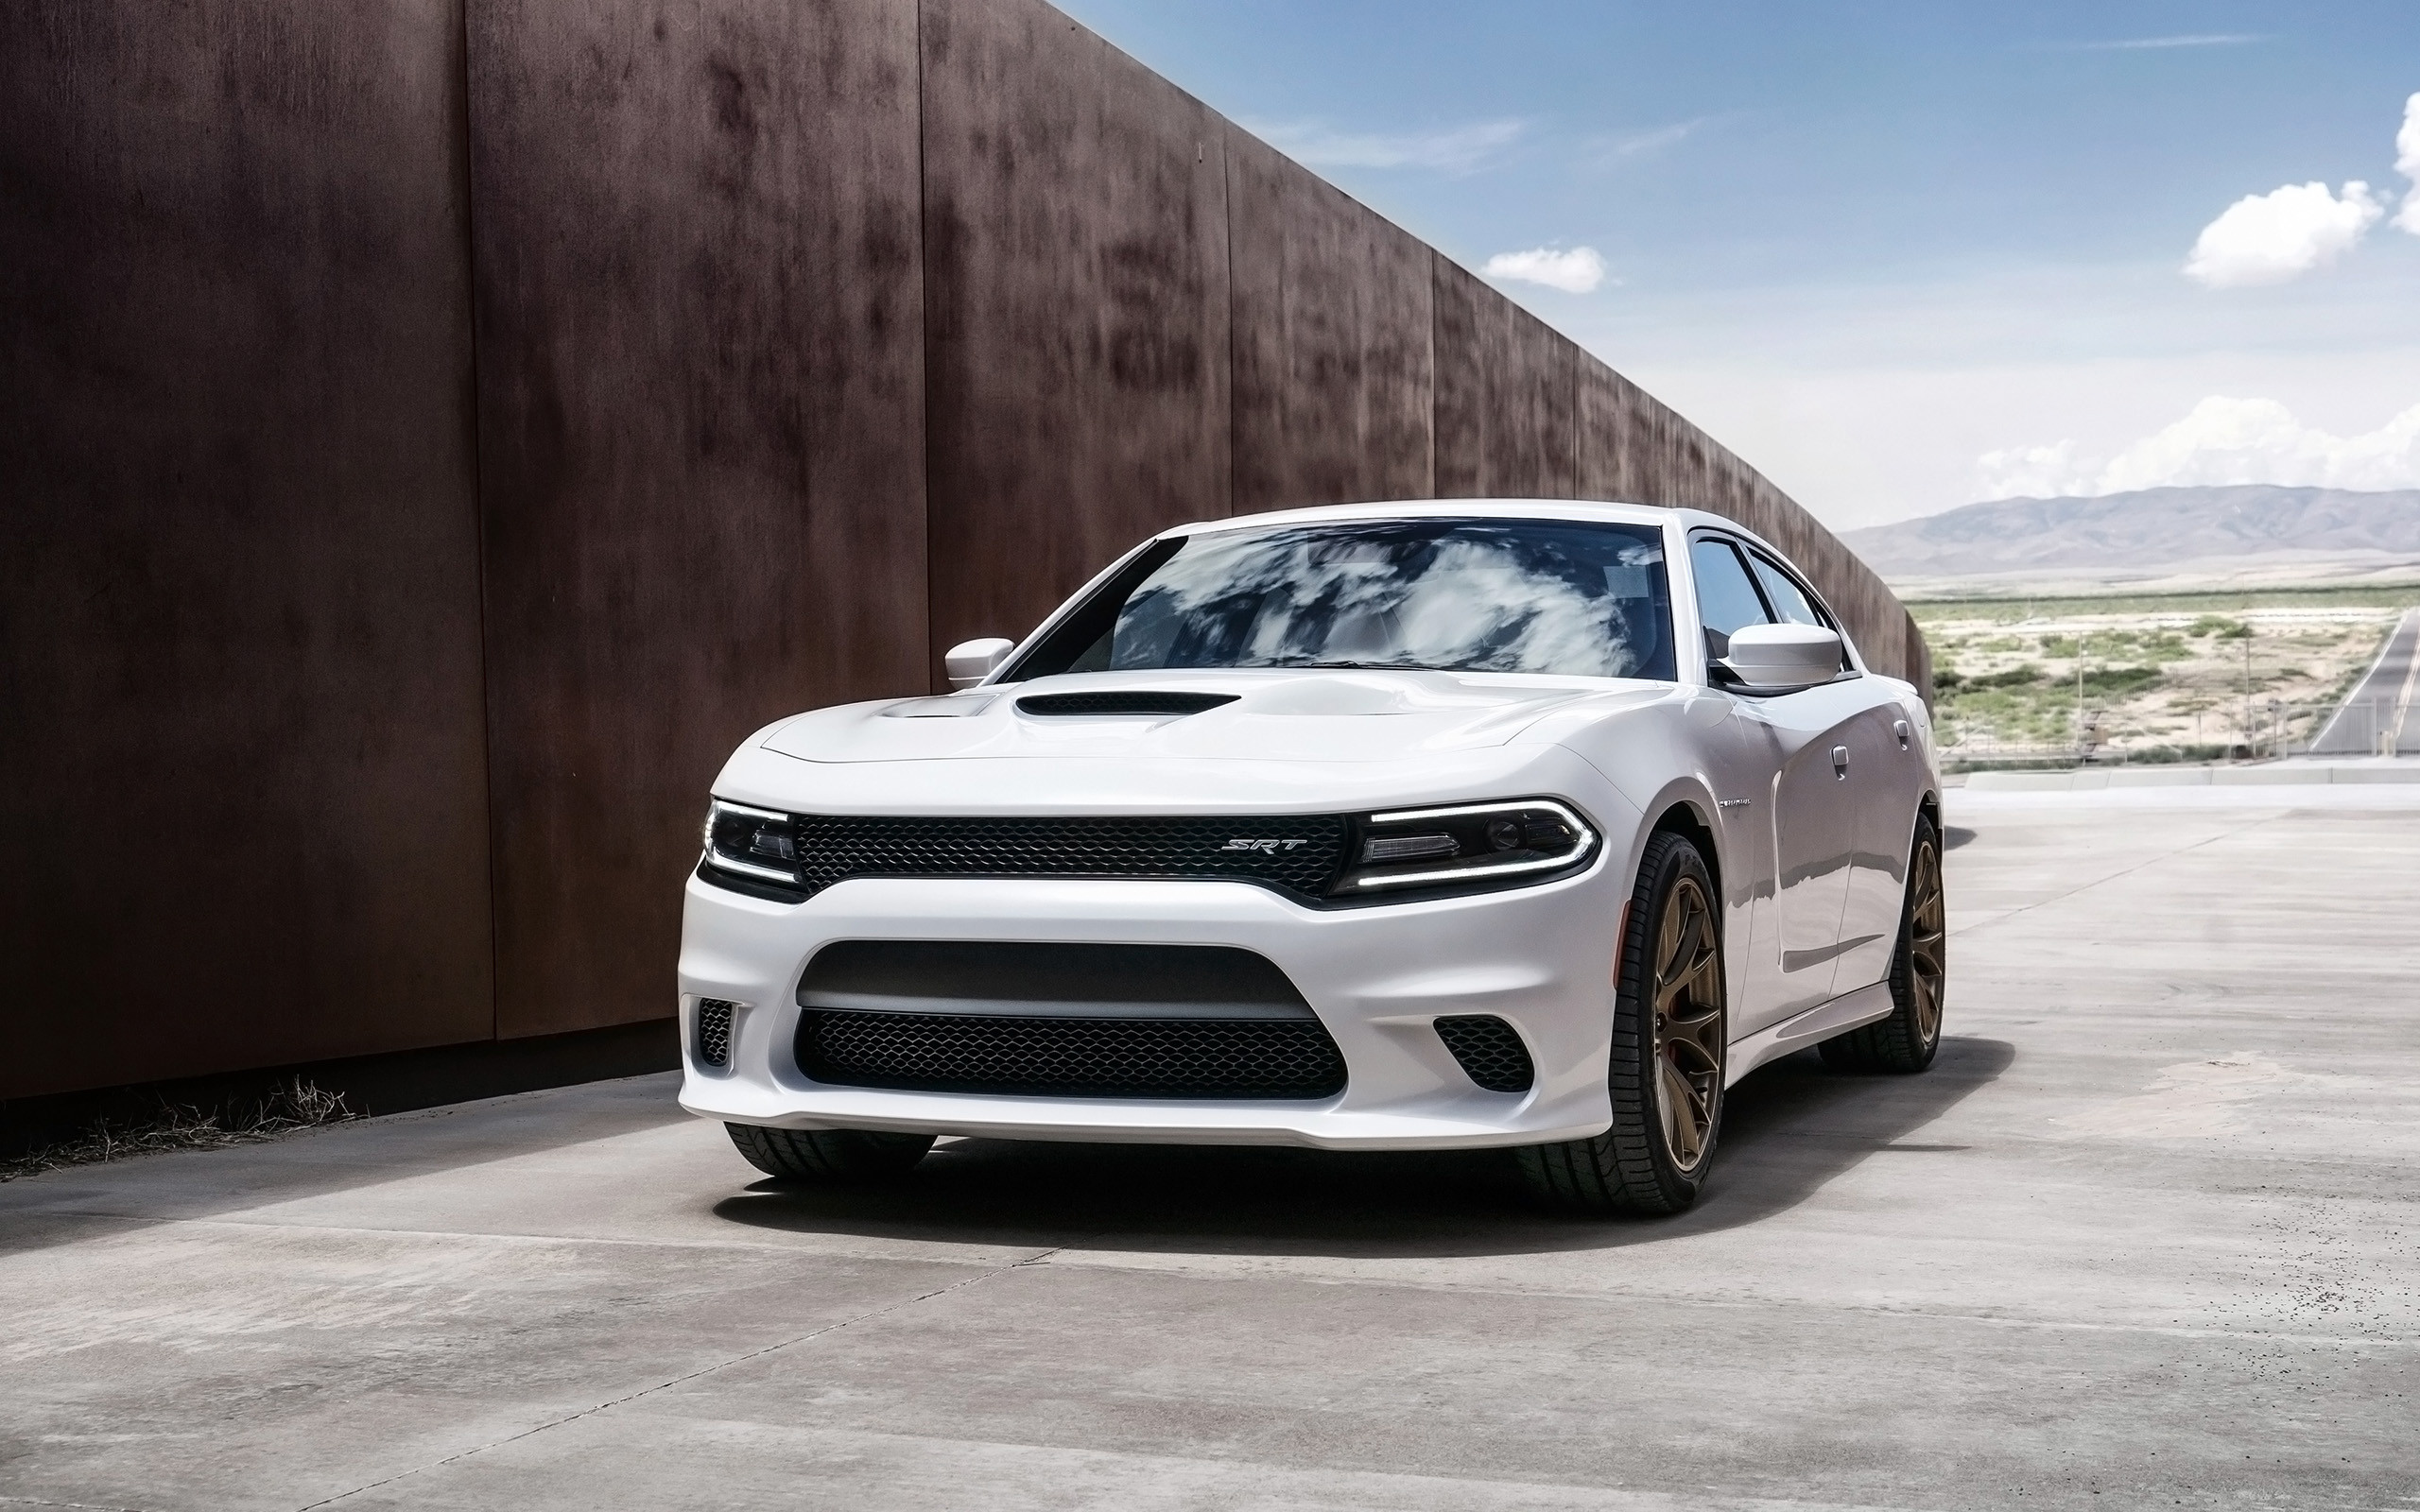 2015 Dodge Charger SRT Hellcat High Quallity 4K Wallpapers HD Car Wallpapers – http